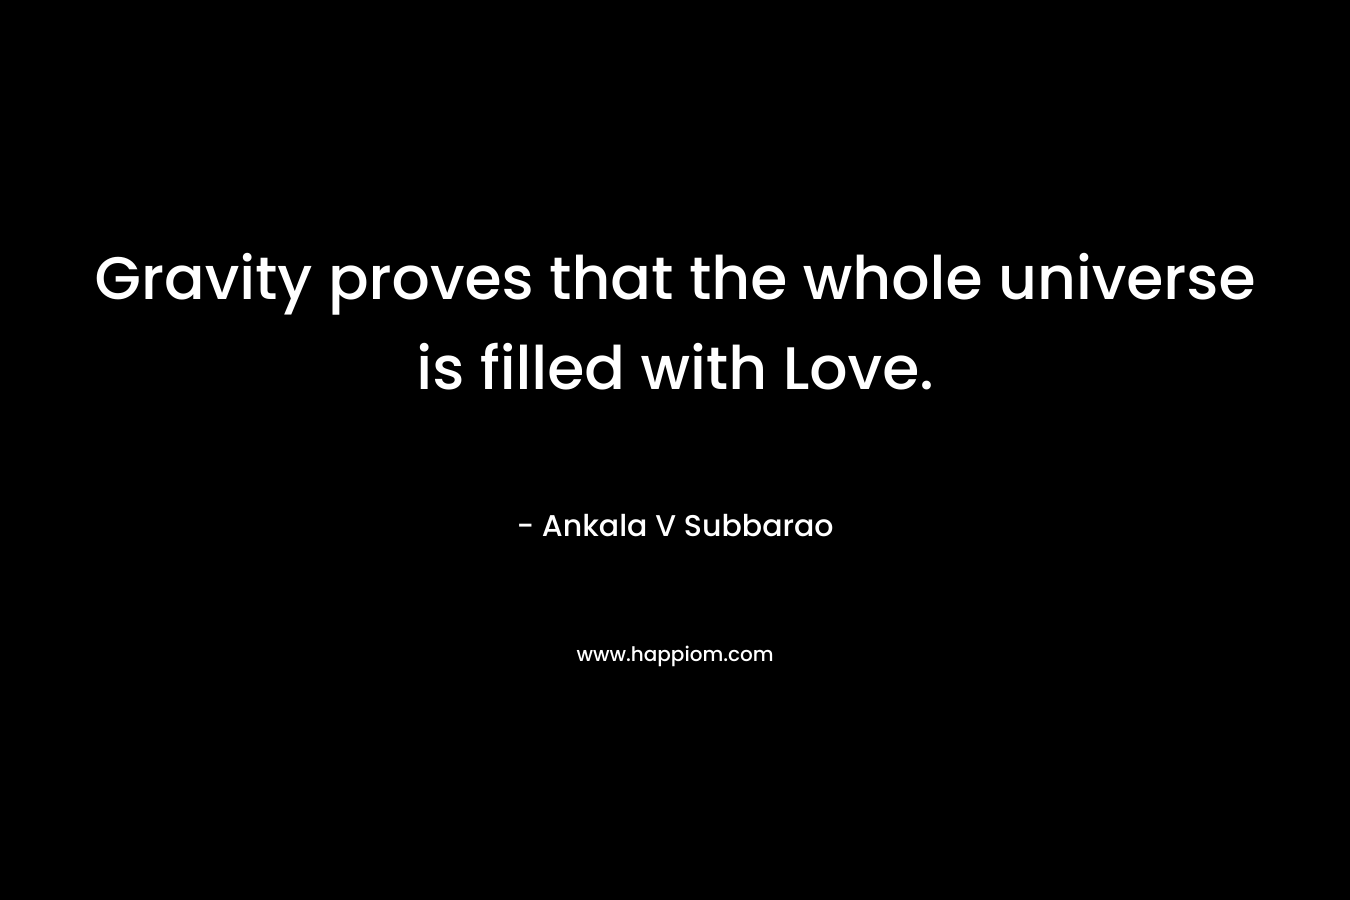 Gravity proves that the whole universe is filled with Love.